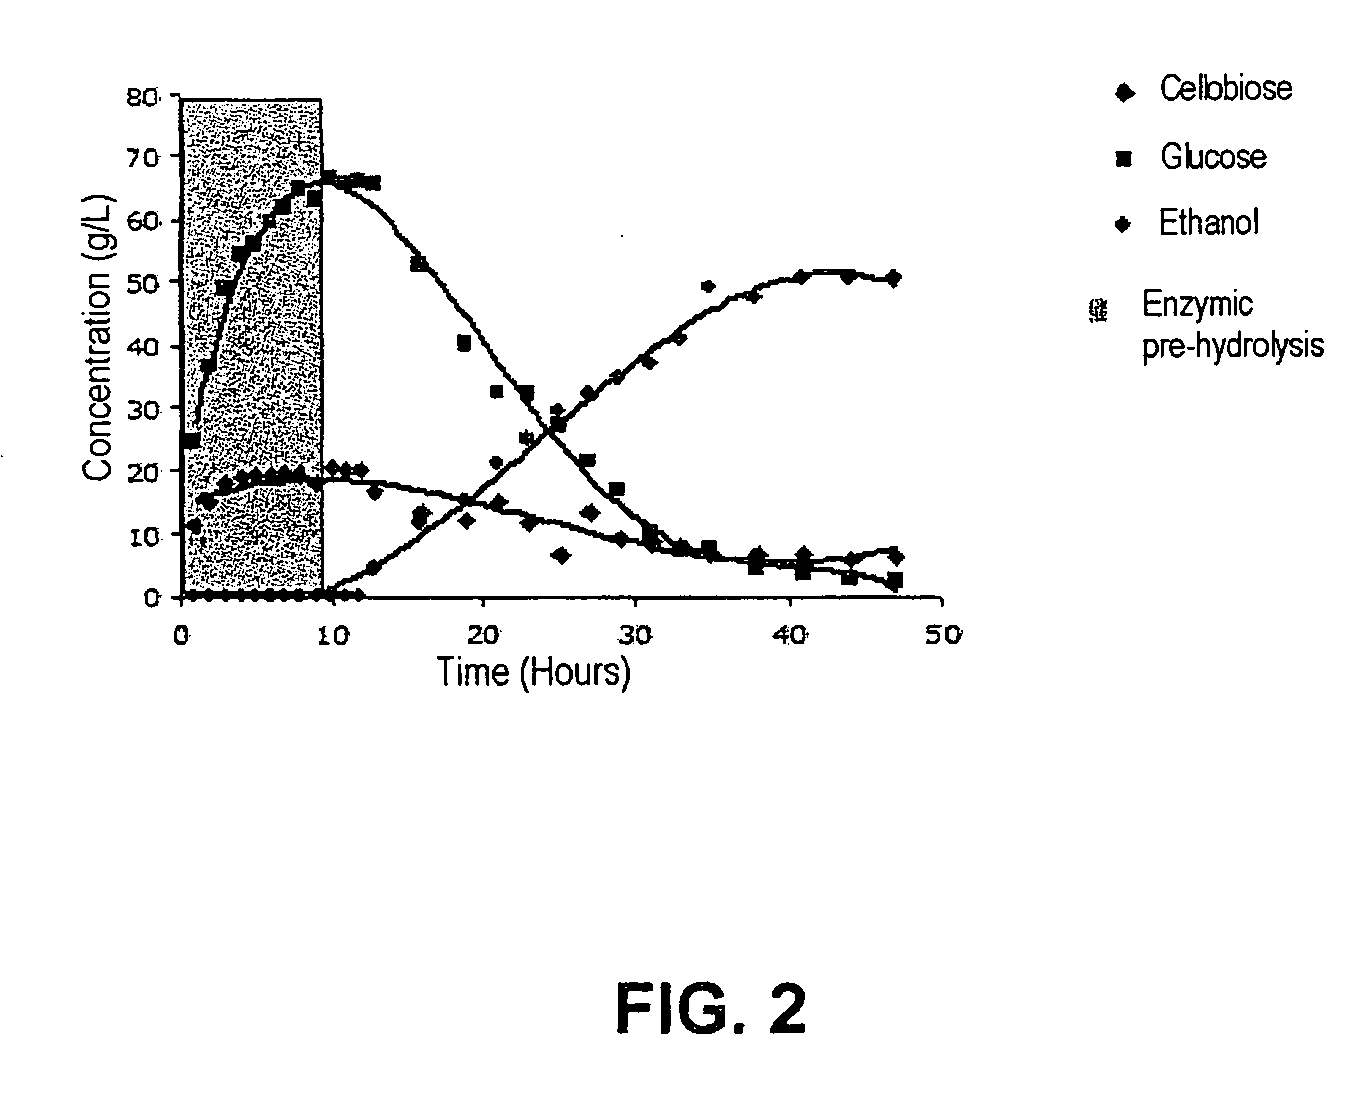 Process for the fermentative production of ethanol from solid lignocellulosic material comprising a step of treating a solid lignocellulosic material with alkaline solution in order to remove the lignin